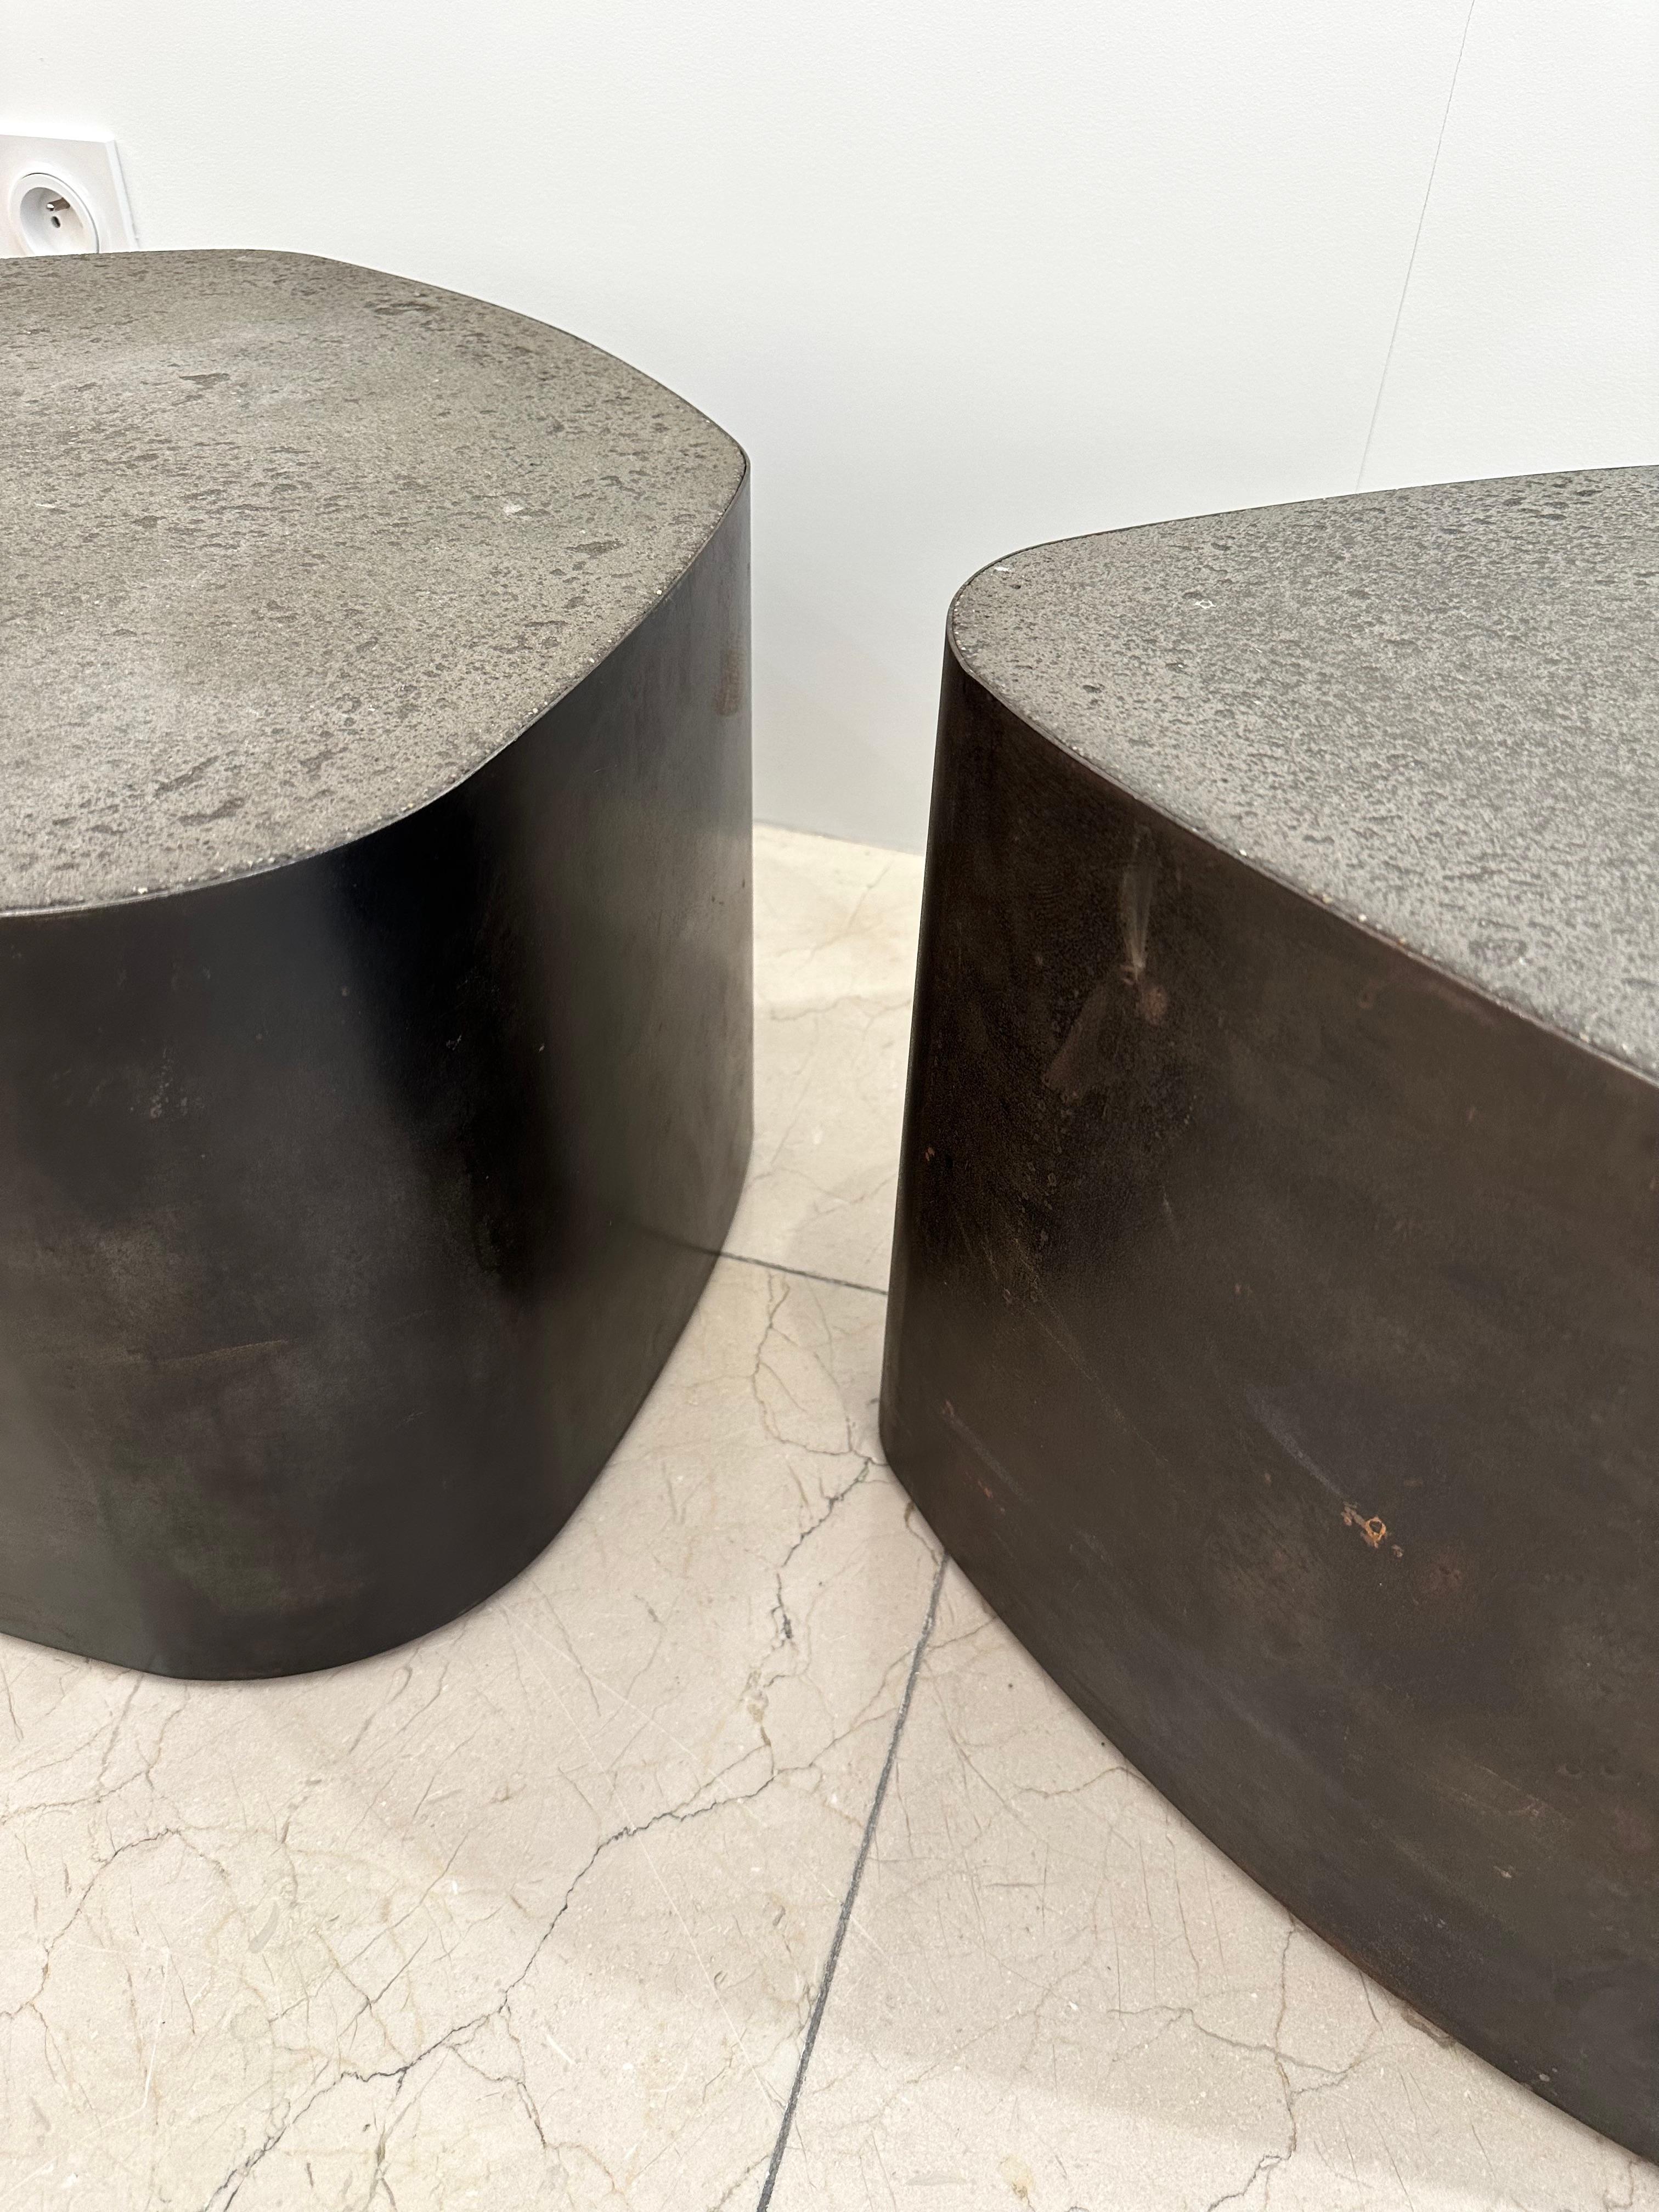 Contemporary brutalist creation Set of 2 or pair of coffee cocktail side end low tables in steel patinated metal and concrete top by the french designer artist Stéphane Ducatteau, sign and dated 2008.

Measurements in description indicated table